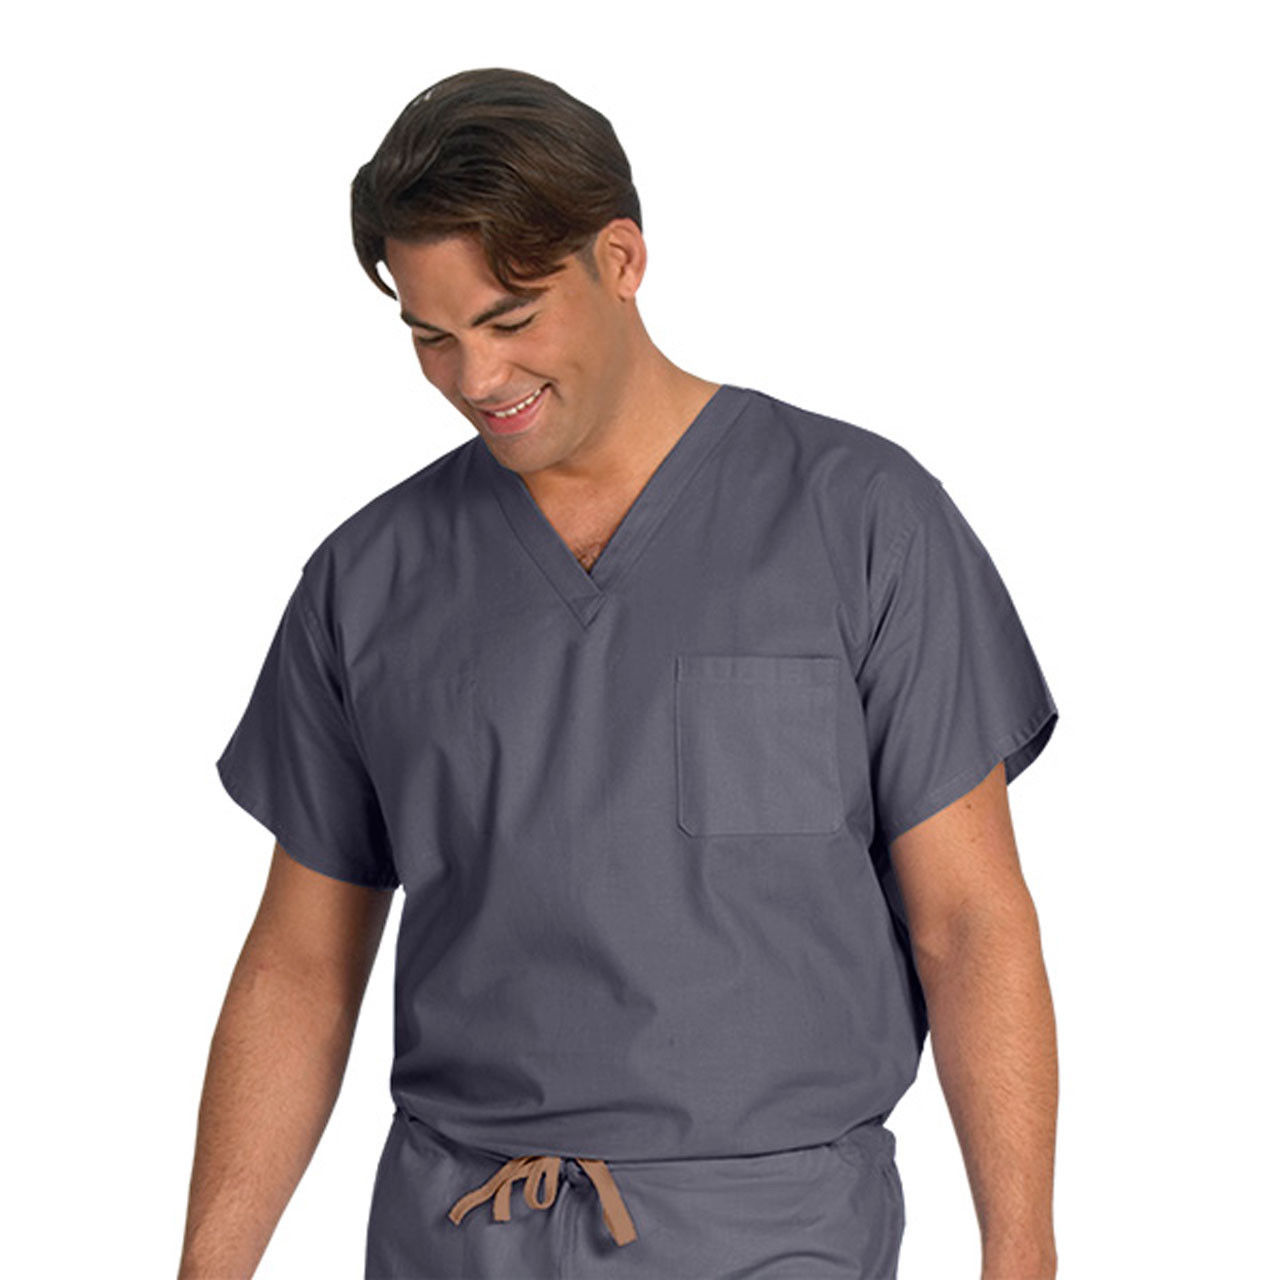 What are the Dignity Health scrub colors and what material are they made of?